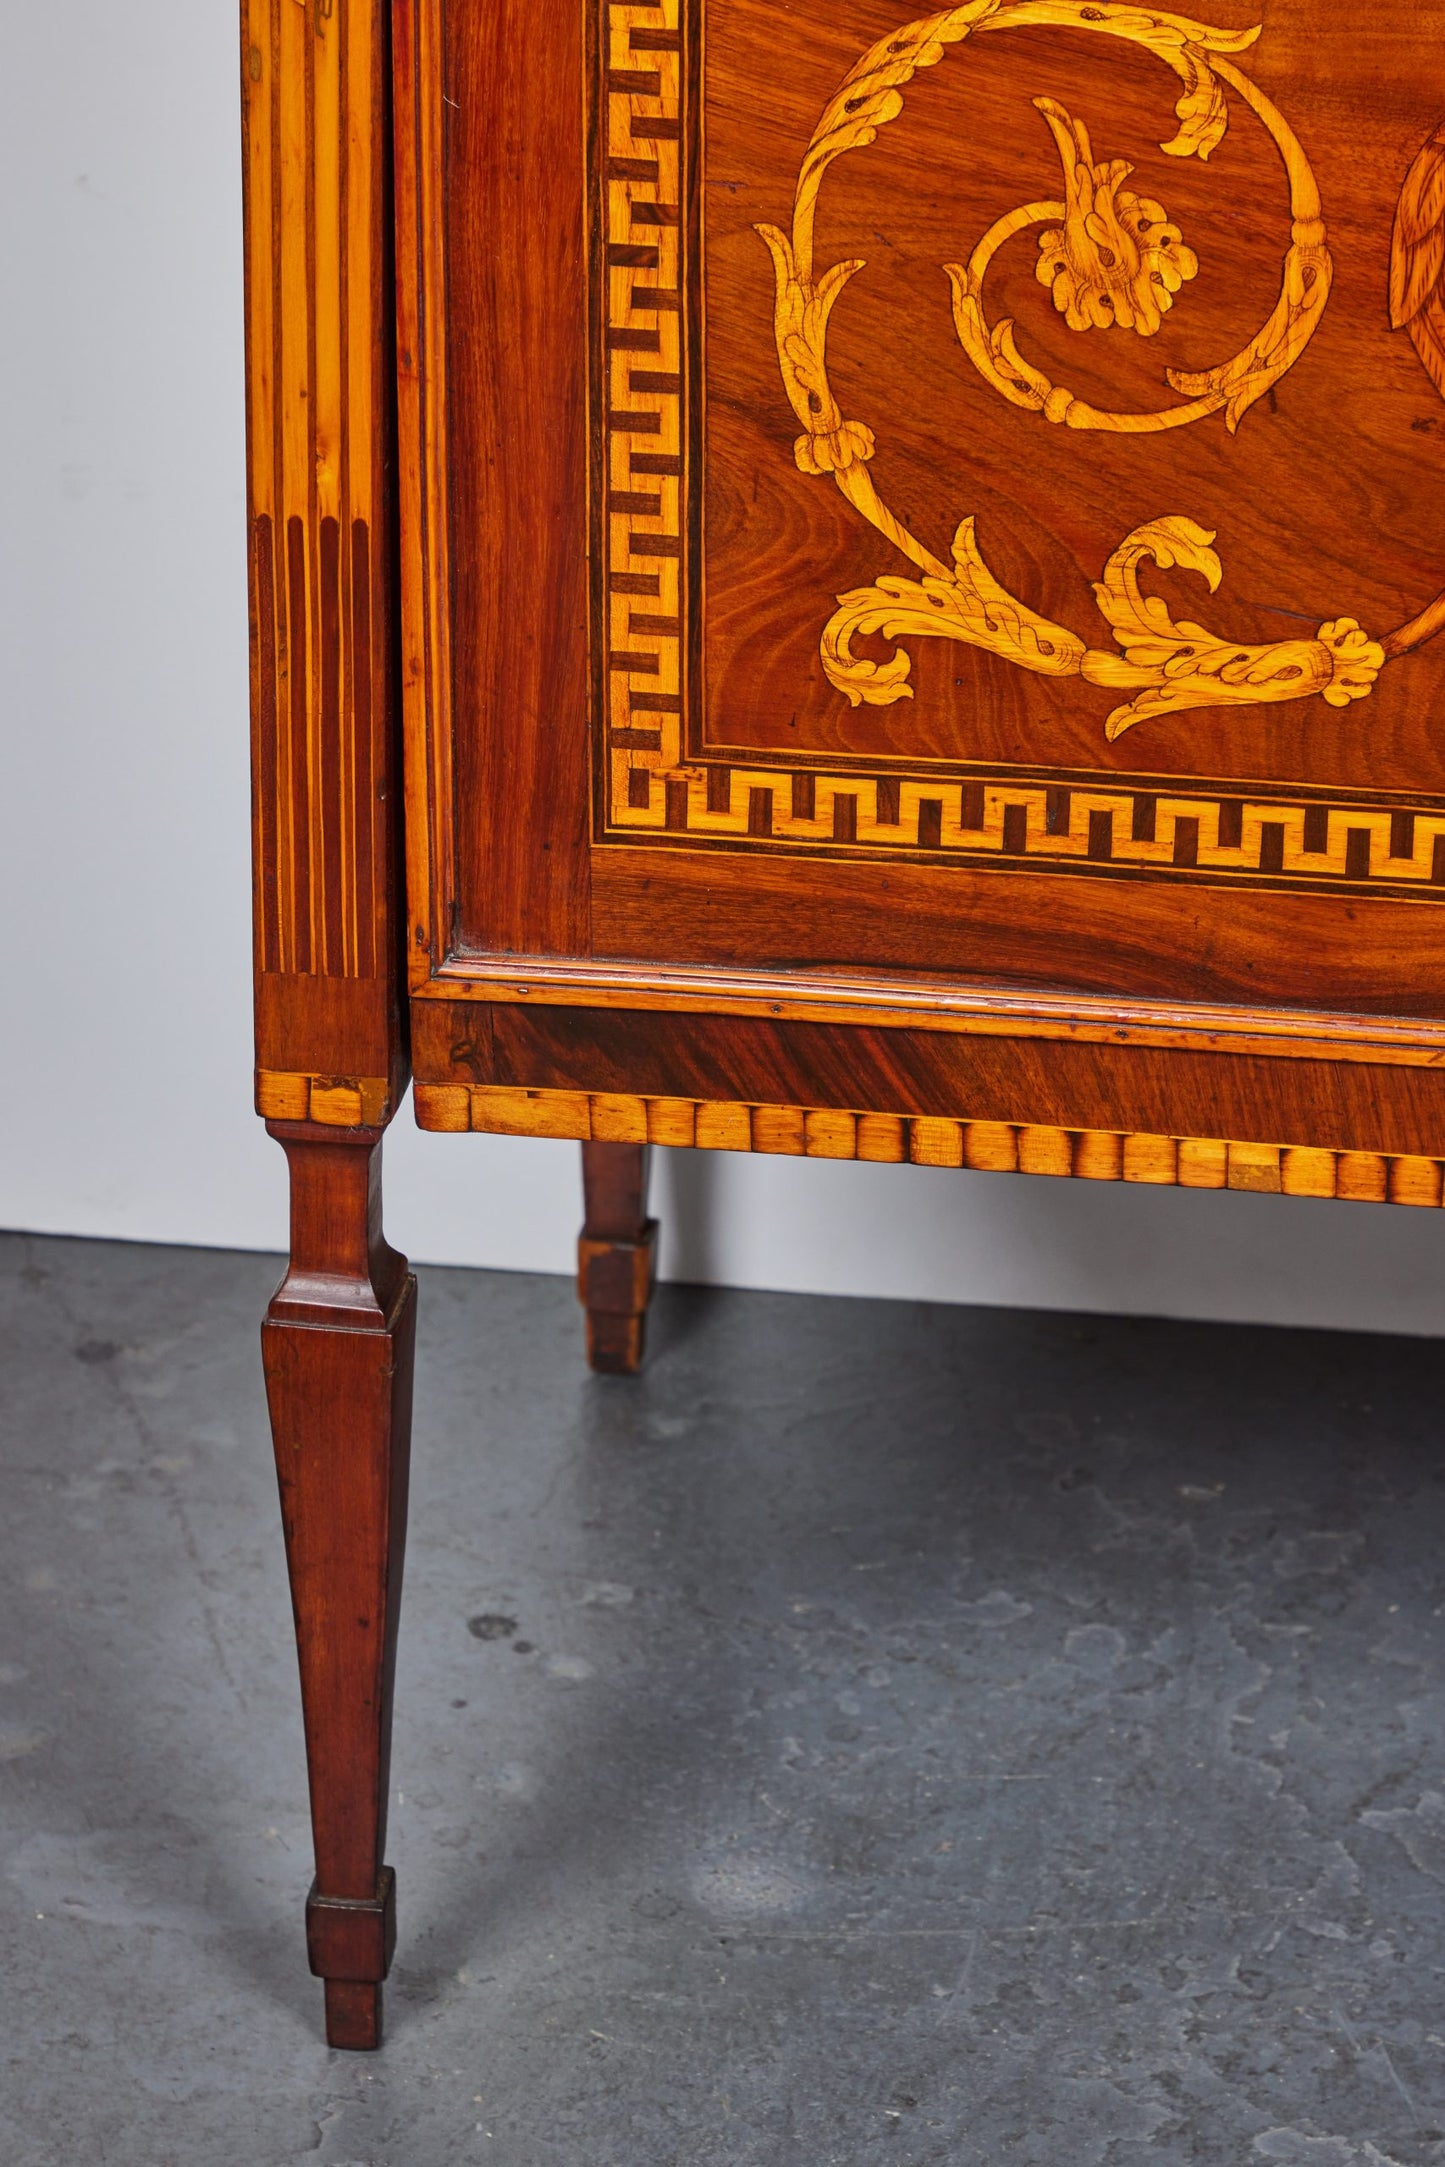 Pair of Royal Crest of Modena Commodes